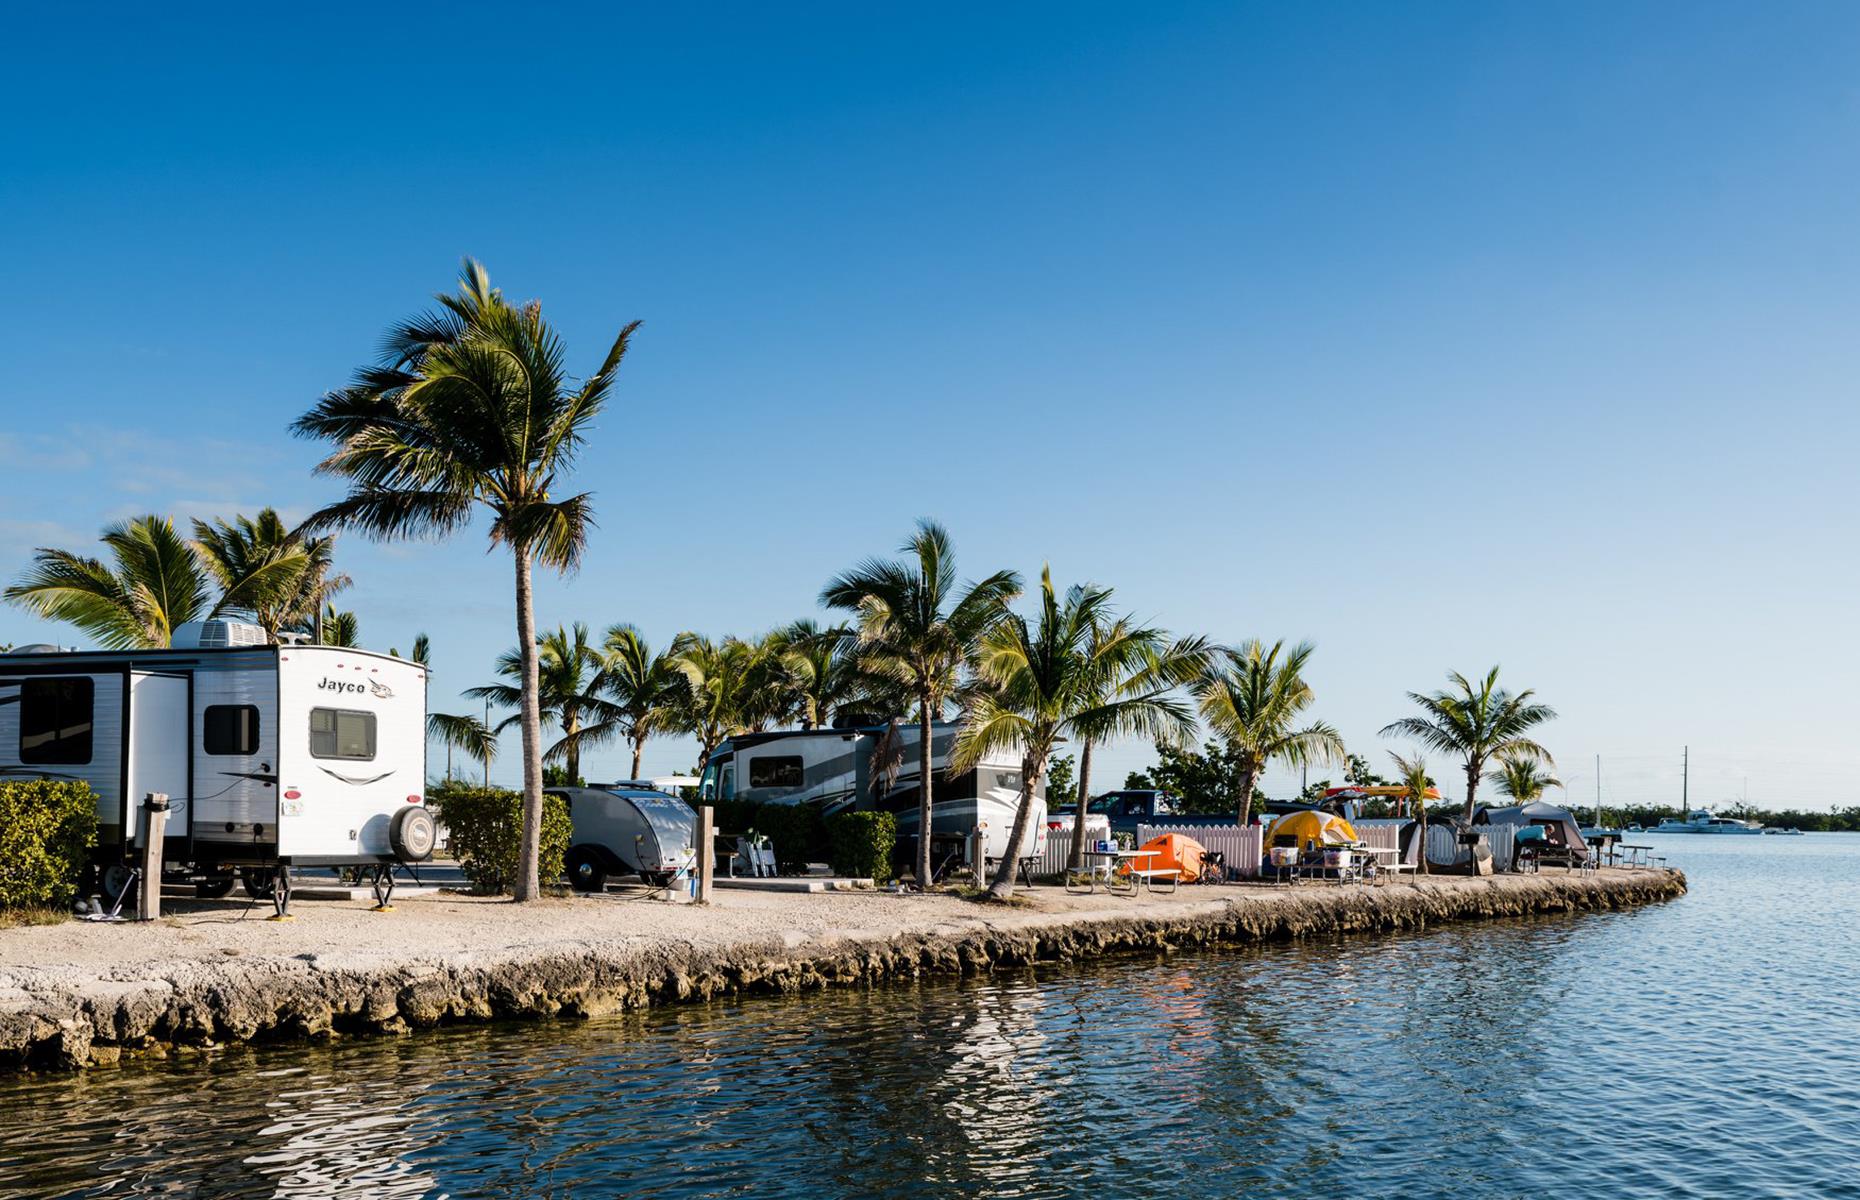 <p>One for beach bums, <a href="https://www.boydscampground.com/">Boyd's Key West Campground</a> is right on the waterfront. The park is family owned and operated, with an inviting heated pool, elevated facilities (think full hook-up sites and gleaming bathhouses) and plenty of spots overlooking the ocean. Typical activities include morning yoga sessions and sunset cruises, but check current availability when you book. Dry Tortugas National Park, with its colorful corals and marine life, is close by too.</p>